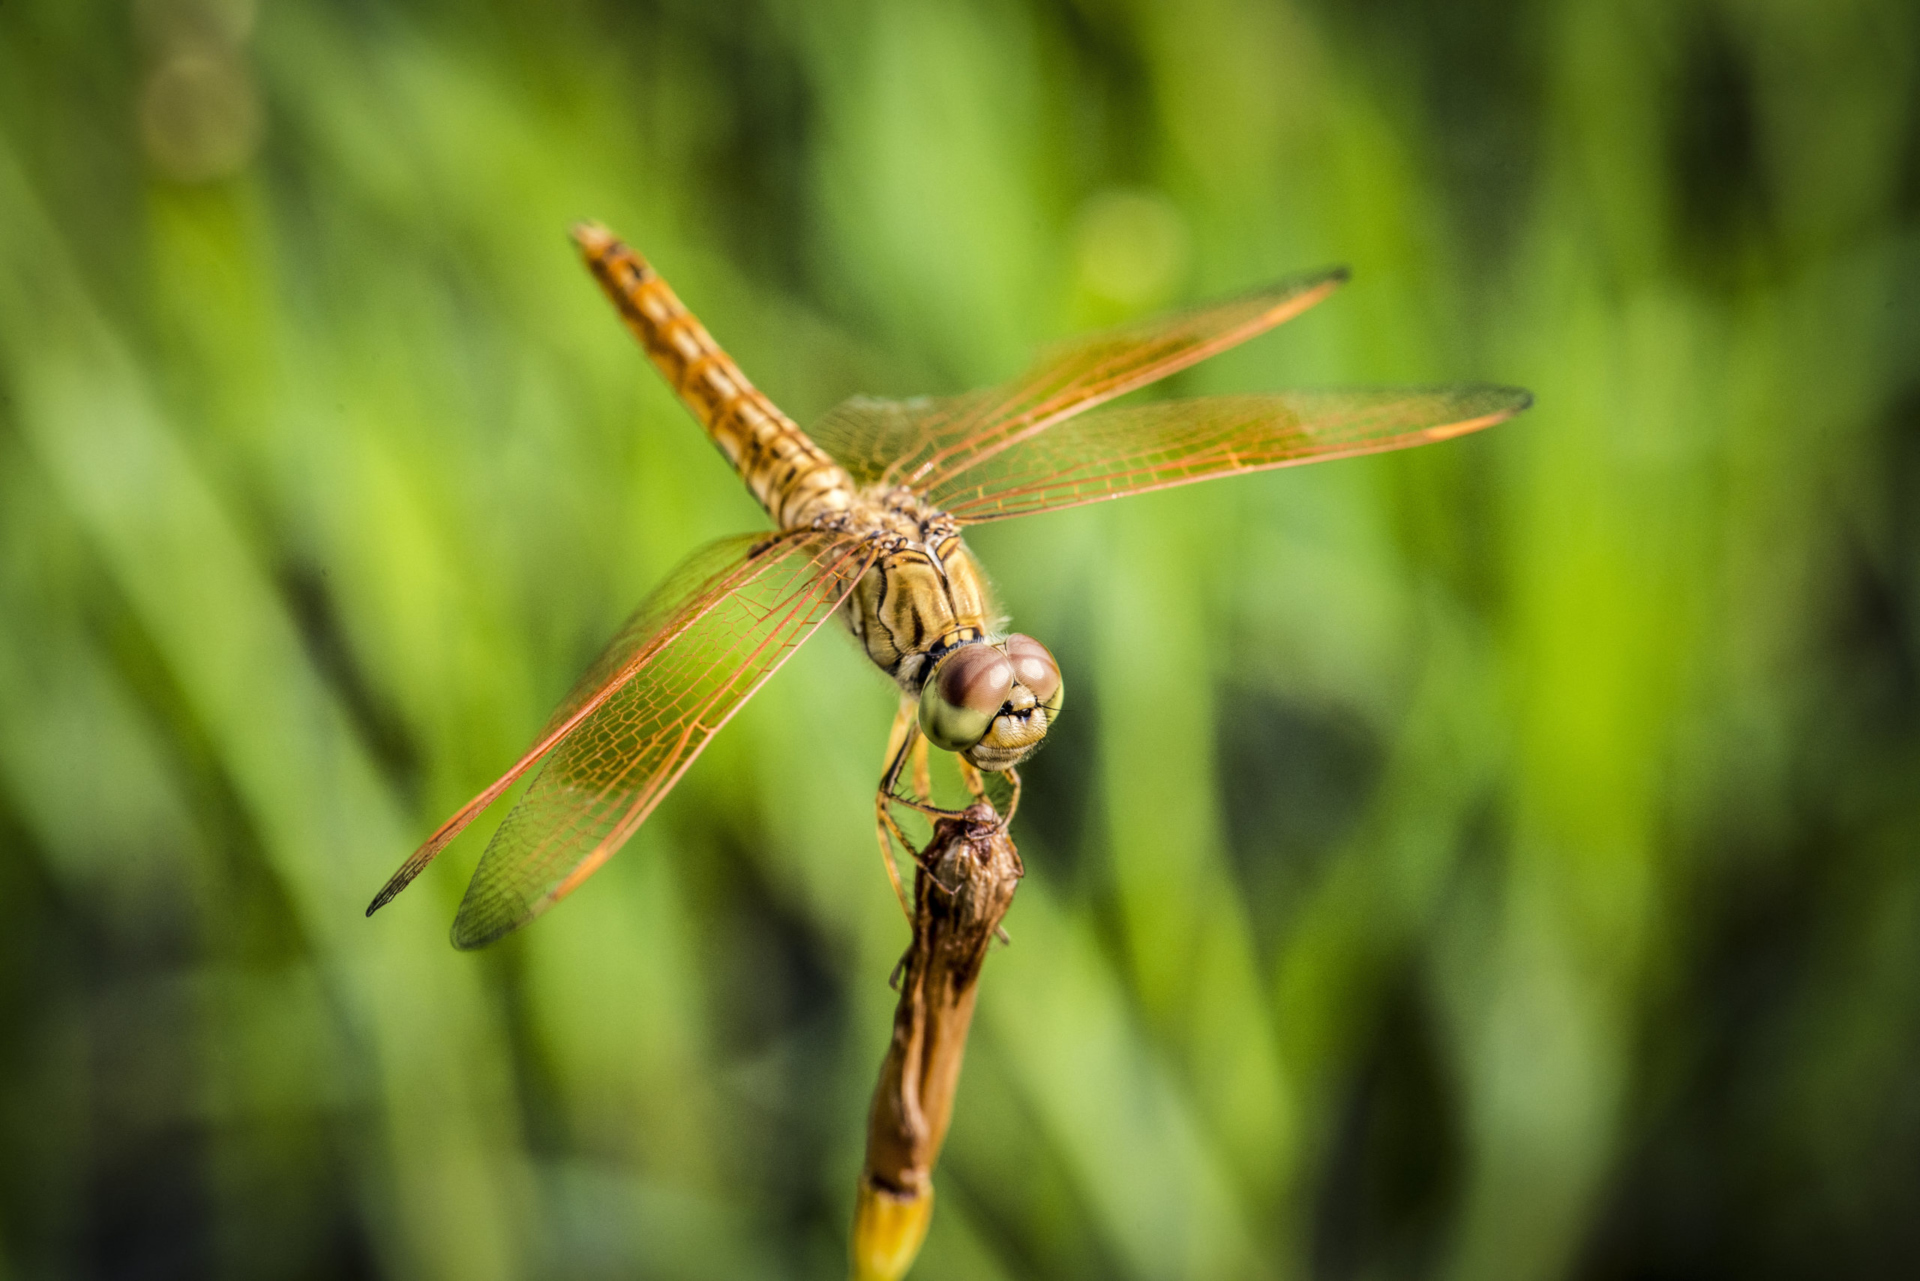 Dragonfly perched on a stalk of grass.